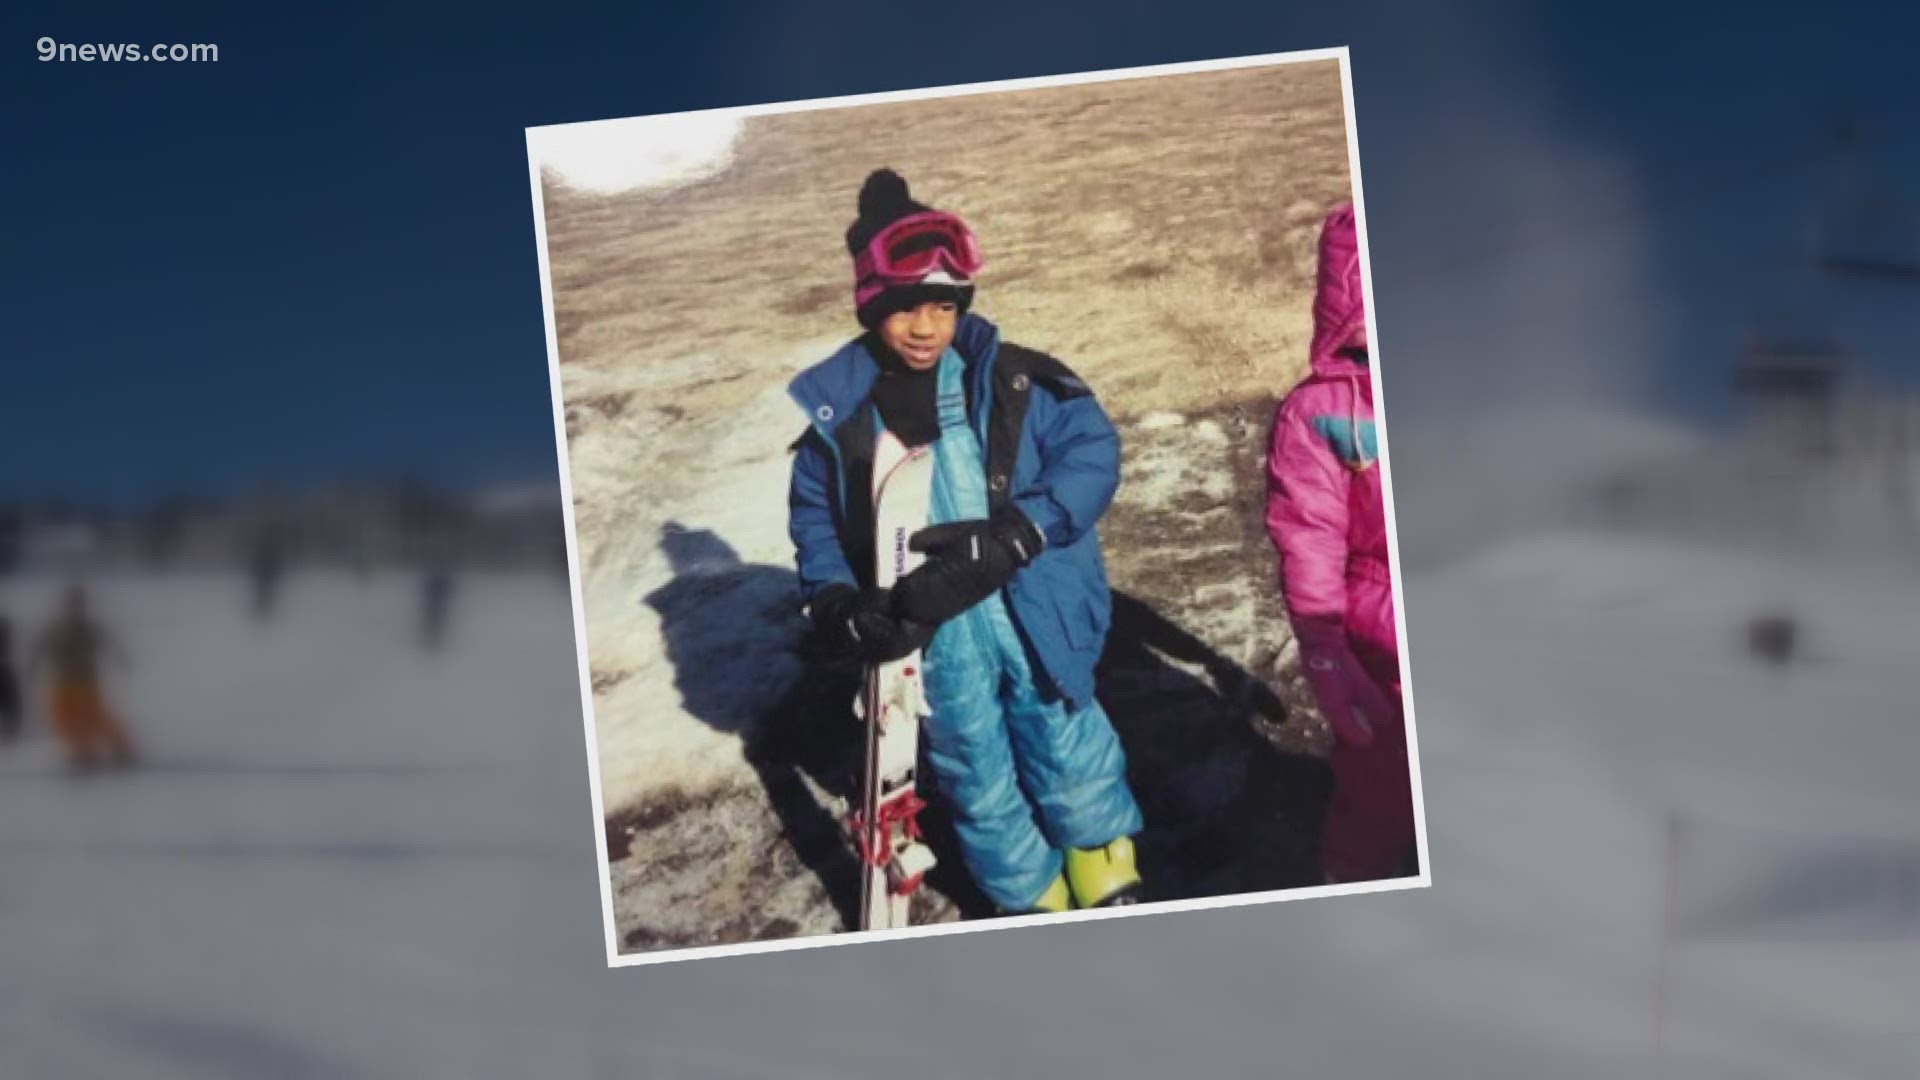 'Neighborhood Uplift' is a new company that aims to get children of color on Colorado's ski slopes.